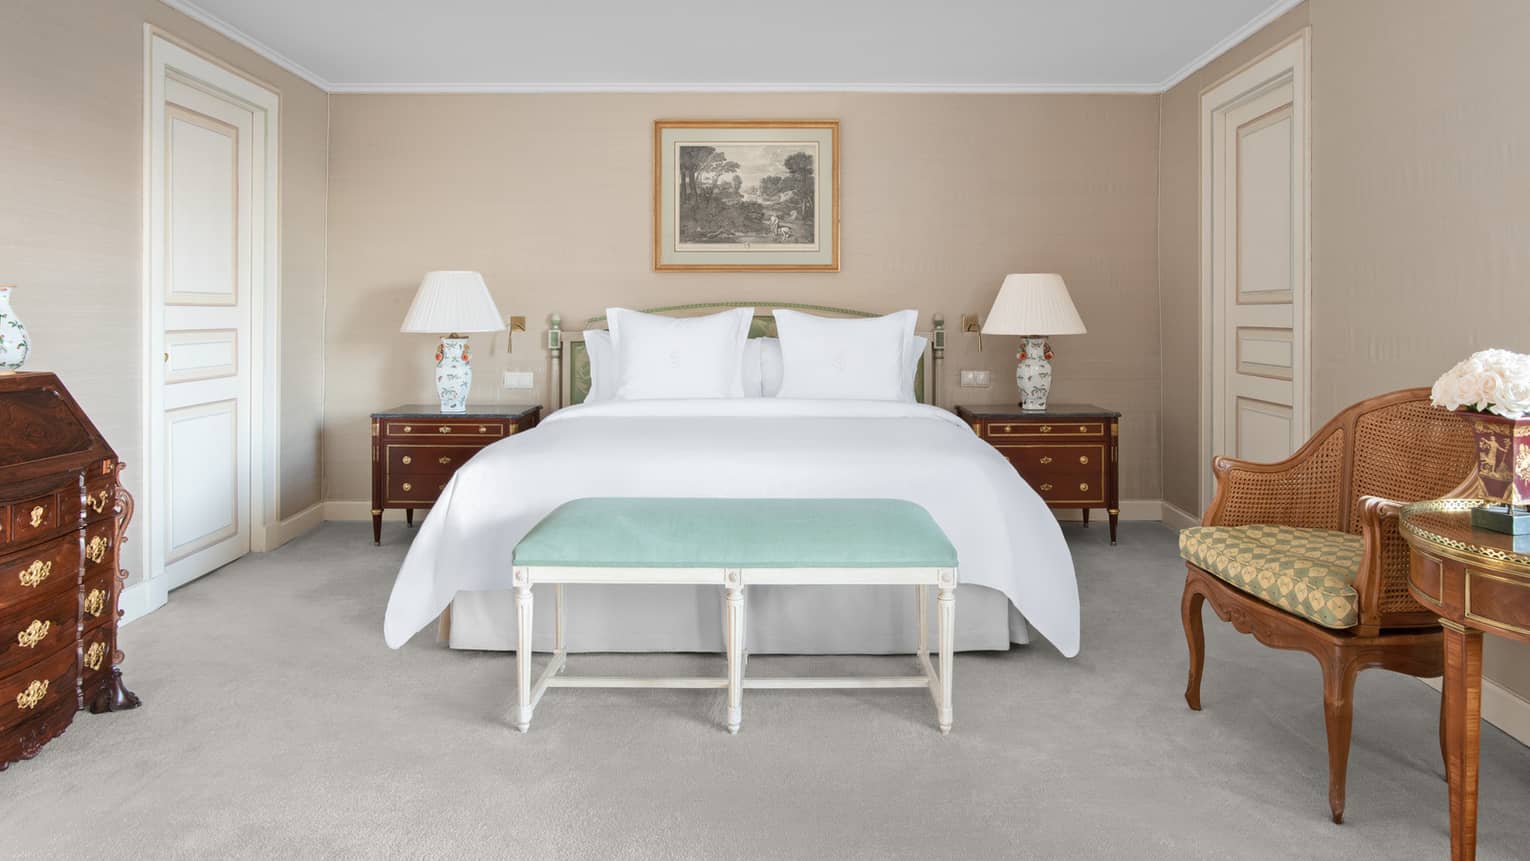 Beige-walled guest room with white bed flanked by wooden nightstands and white lamps, blue foot bench